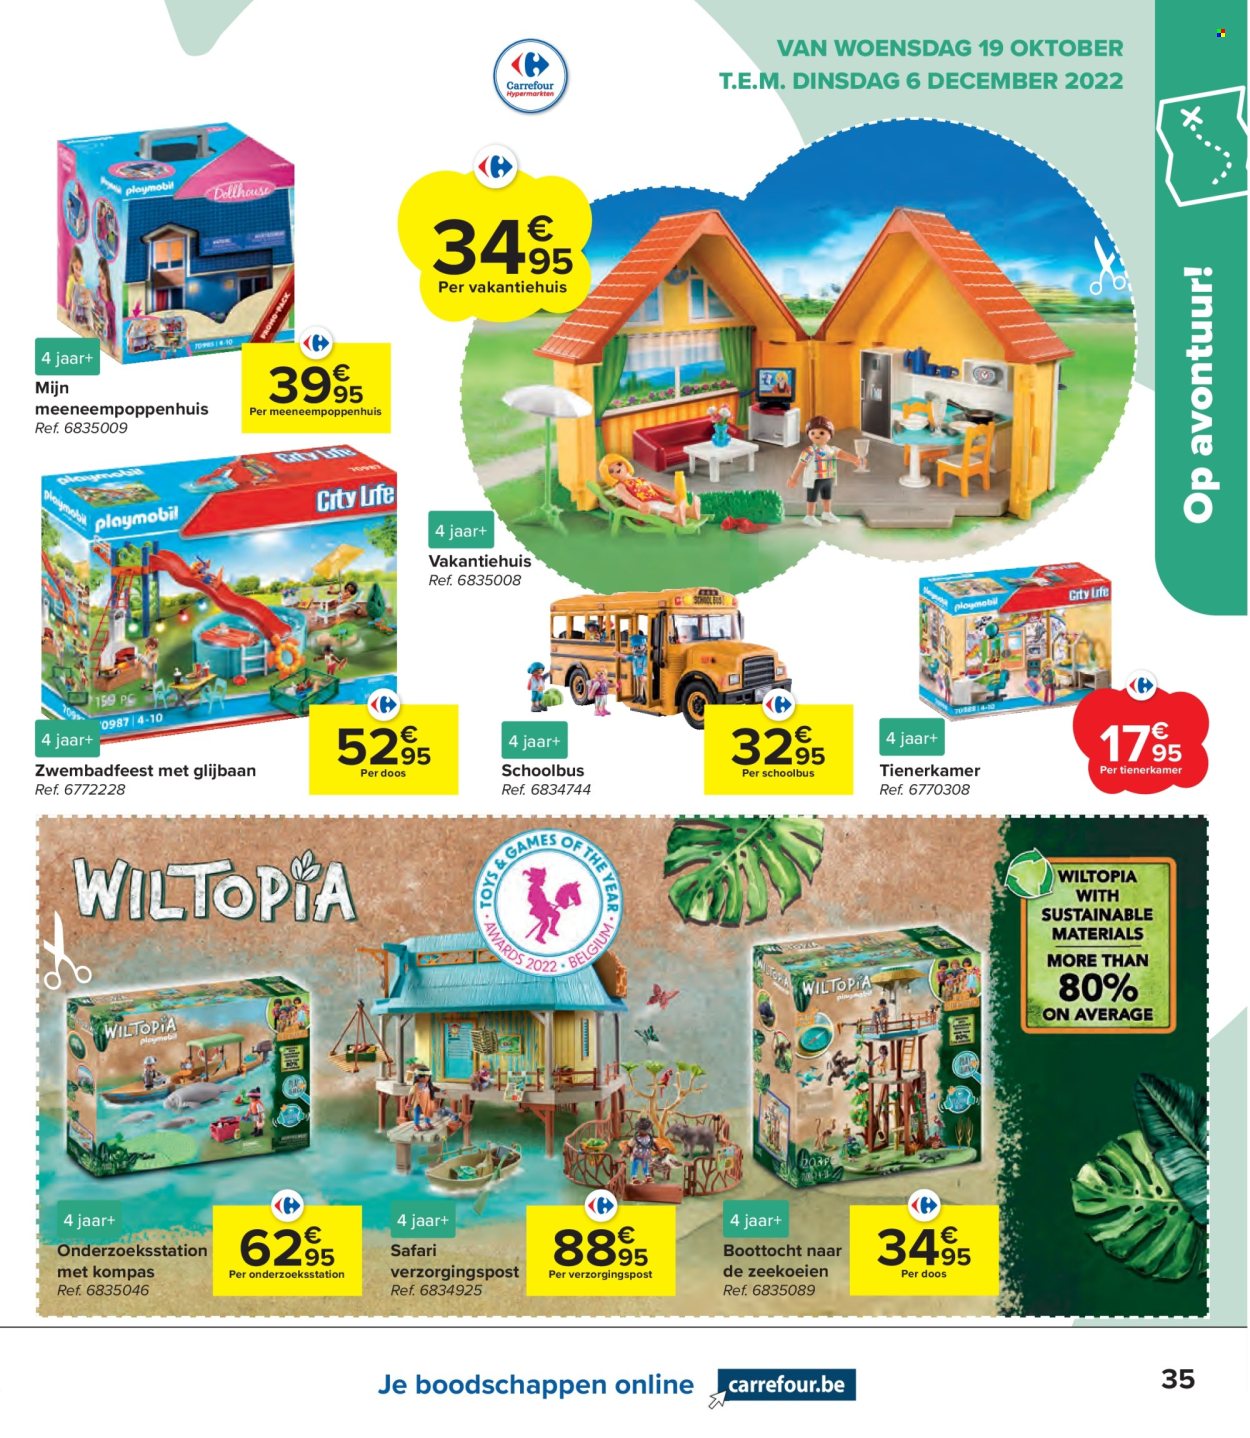 Catalogue Carrefour hypermarkt - 19.10.2022 - 6.12.2022. Page 35.